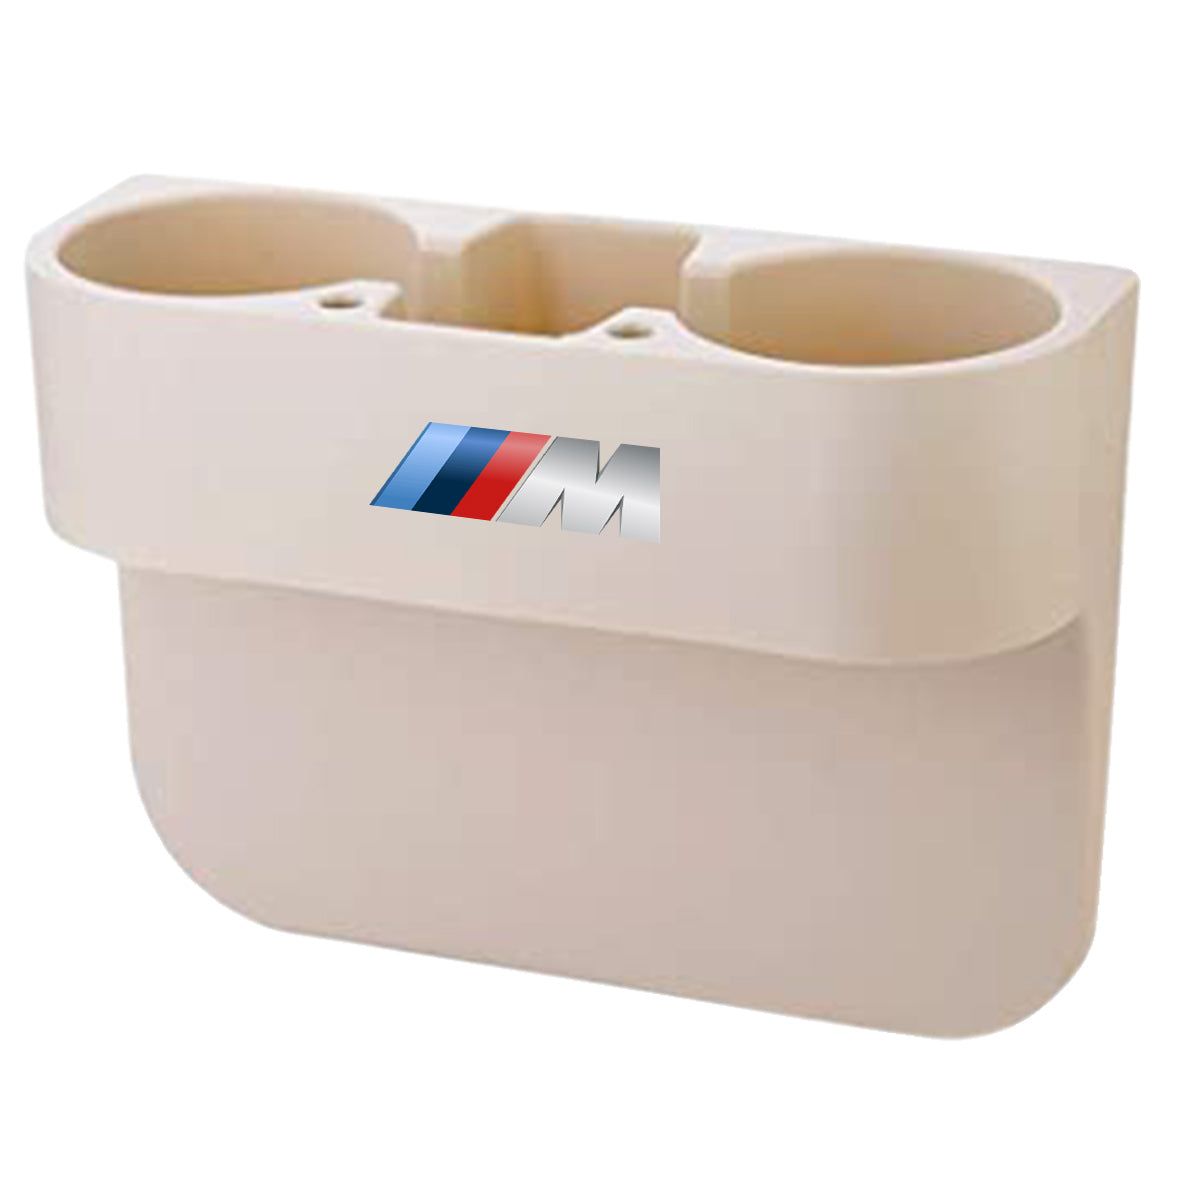 BMW Car Cup Holder: Convenient and Secure Beverage Storage for Your Vehicle